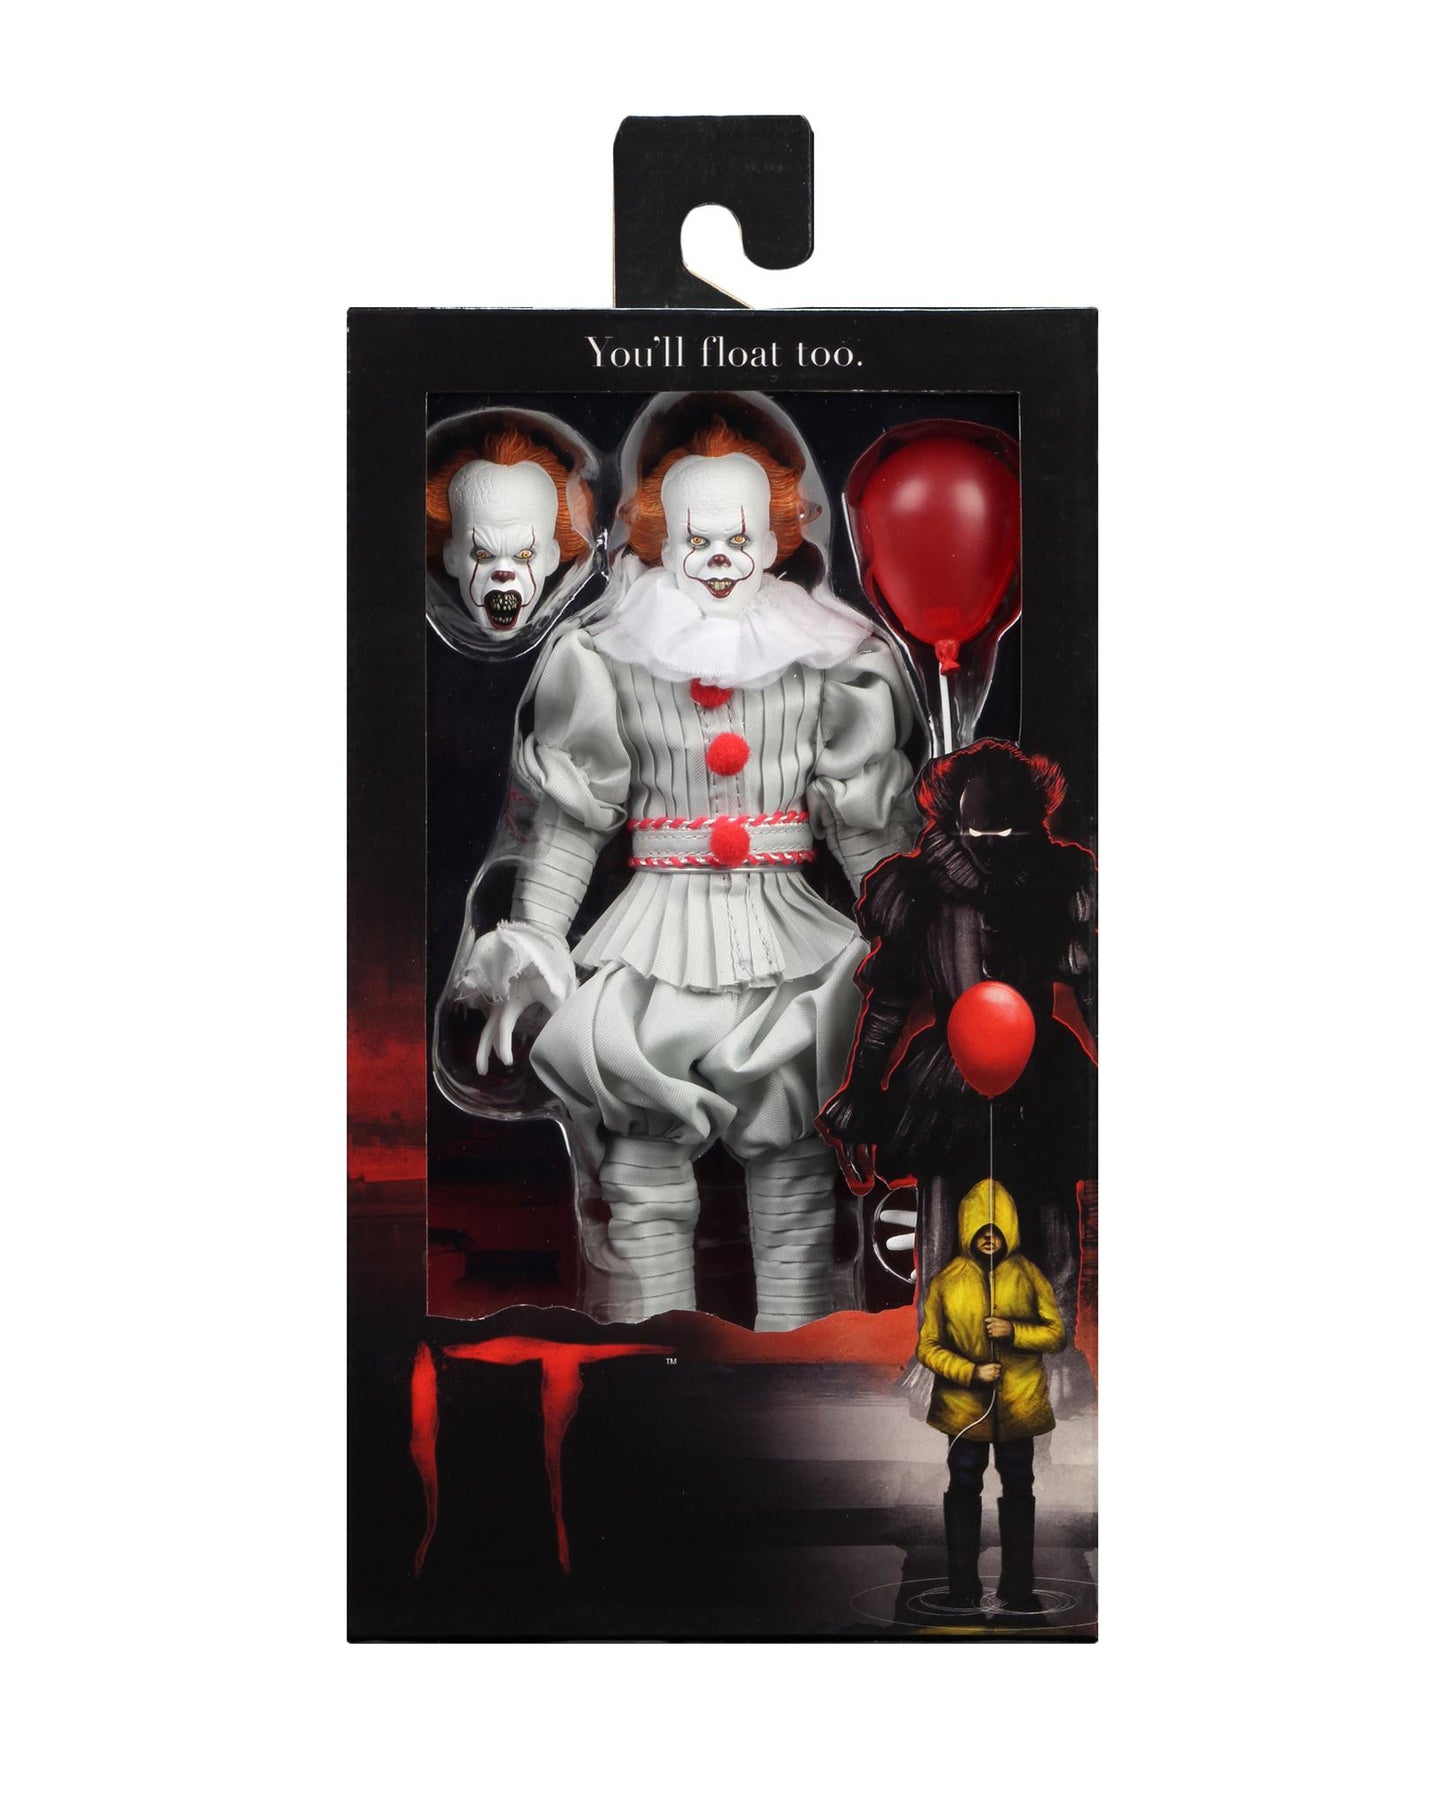 IT - Pennywise 2017 8" Clothed Figure